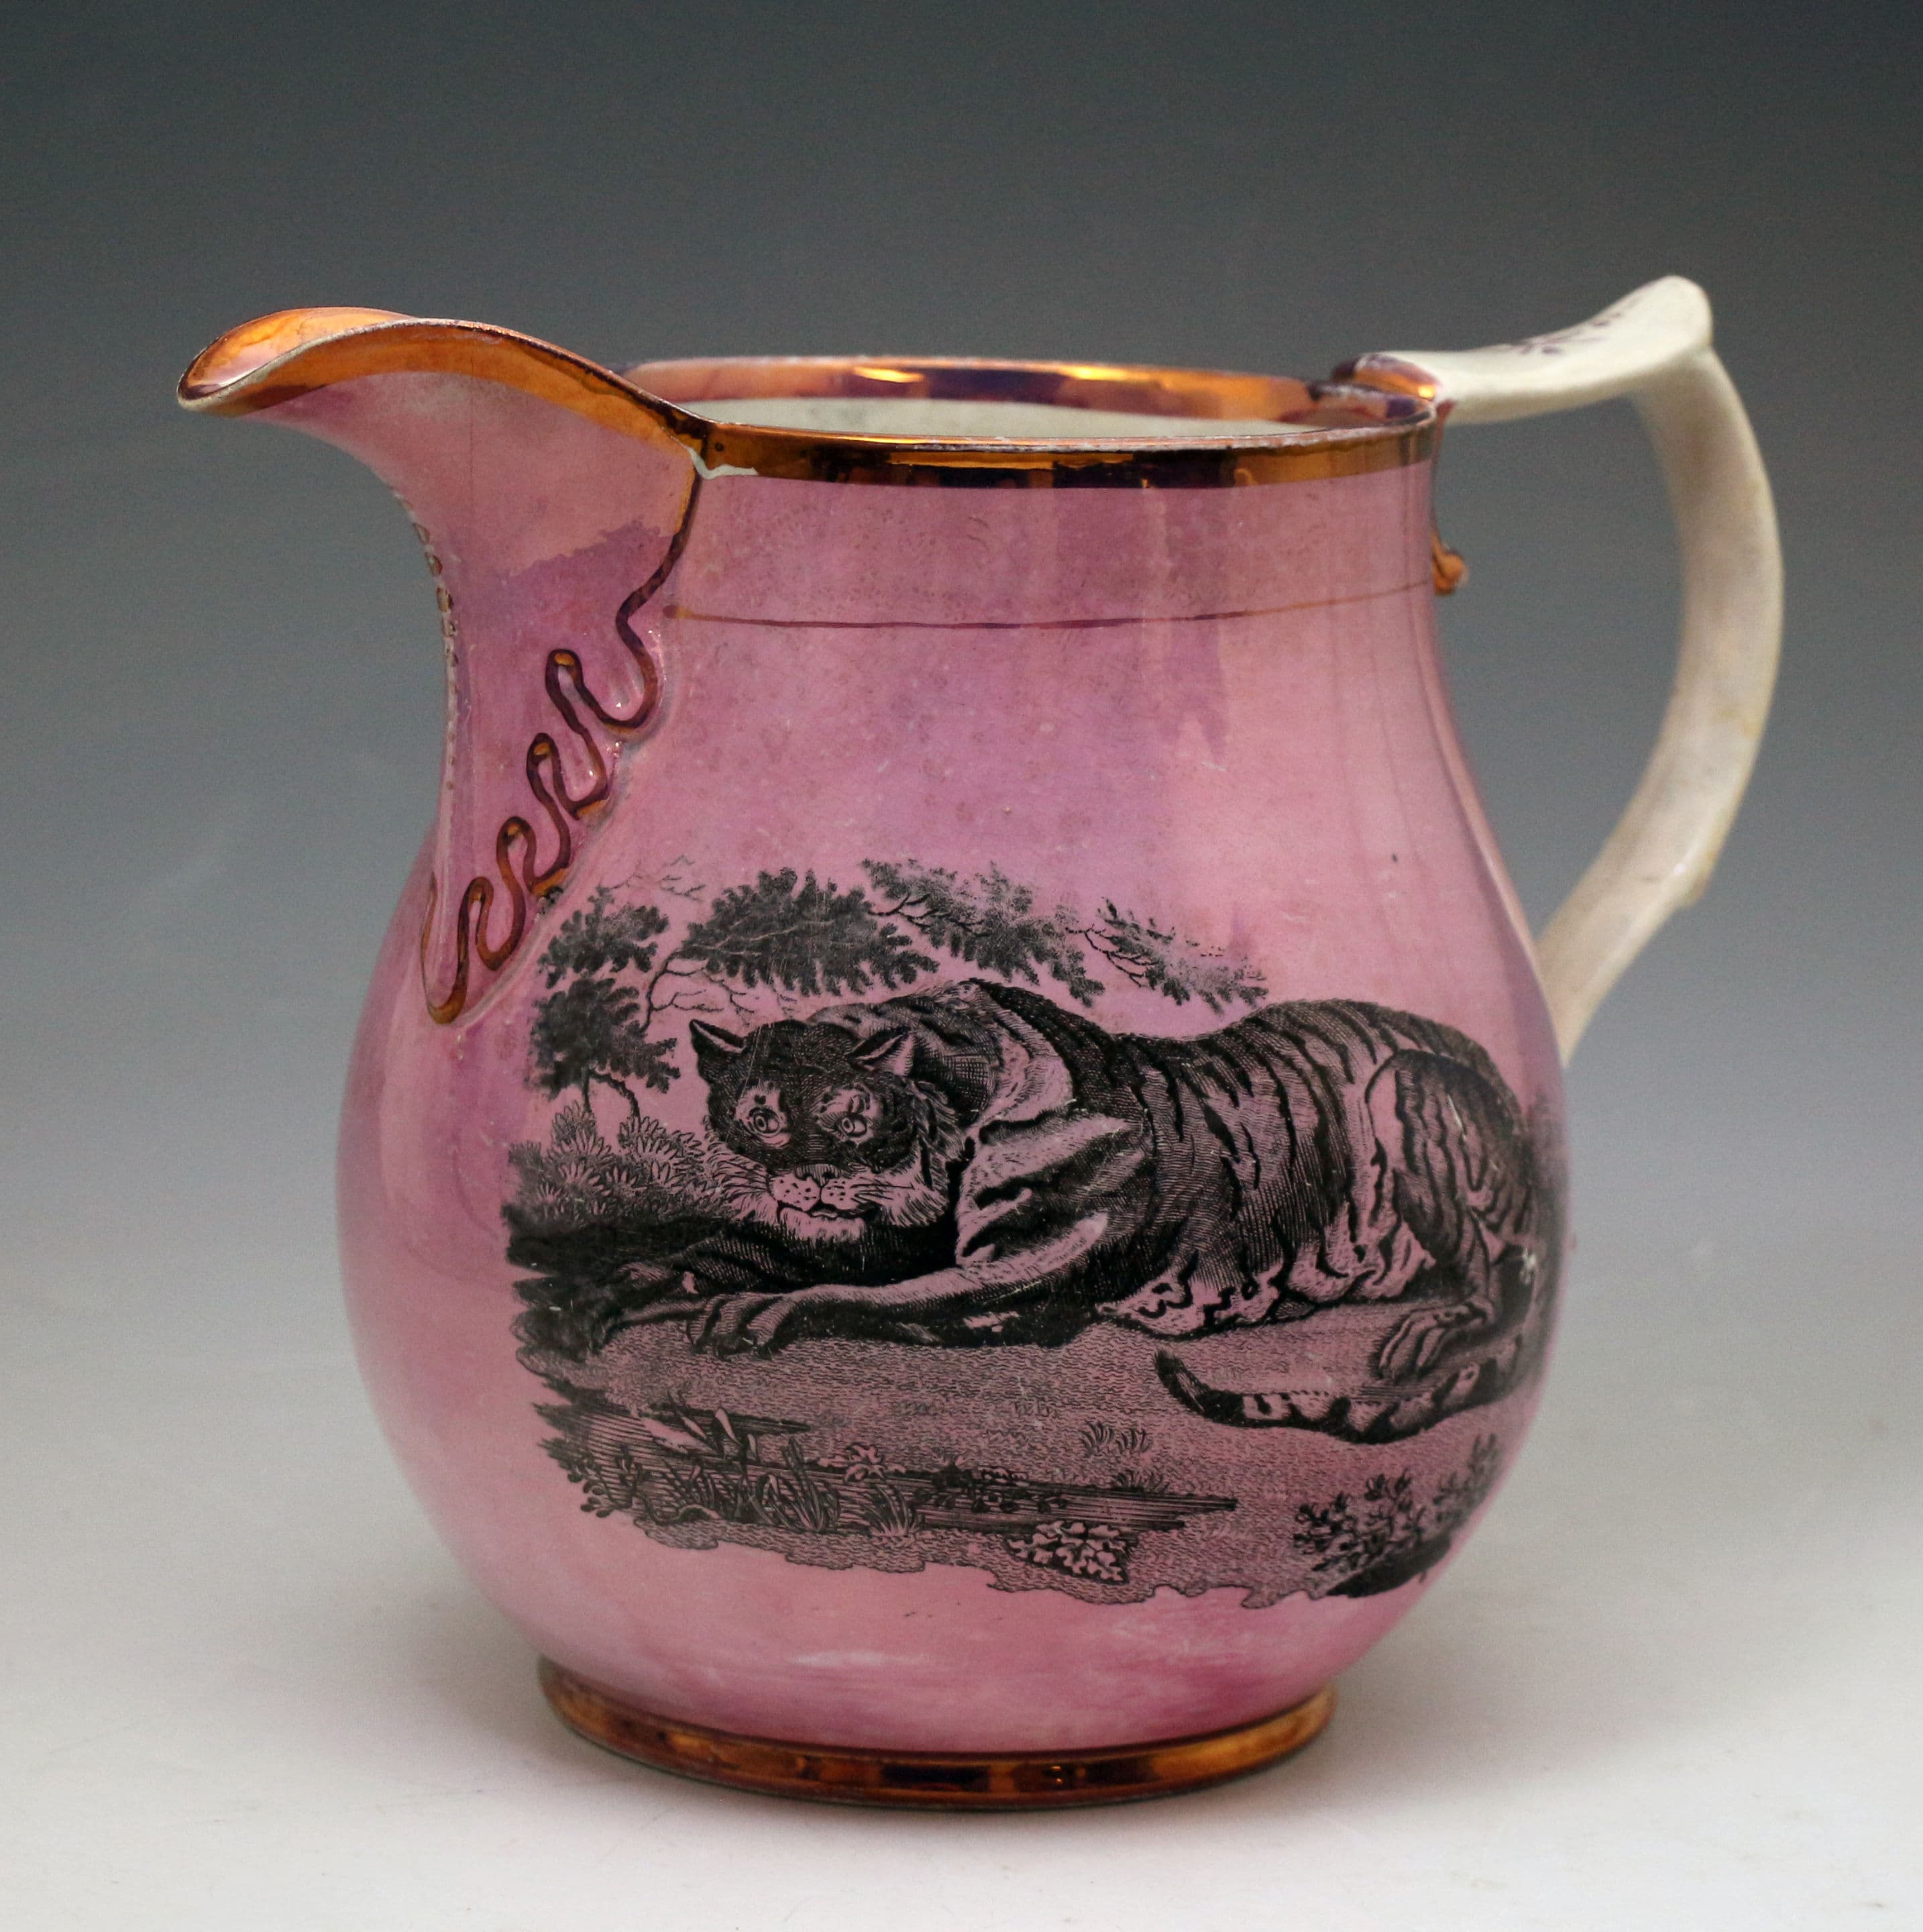 Antique English pottery pink luster pitcher with image of tiger early 19th century John Howard